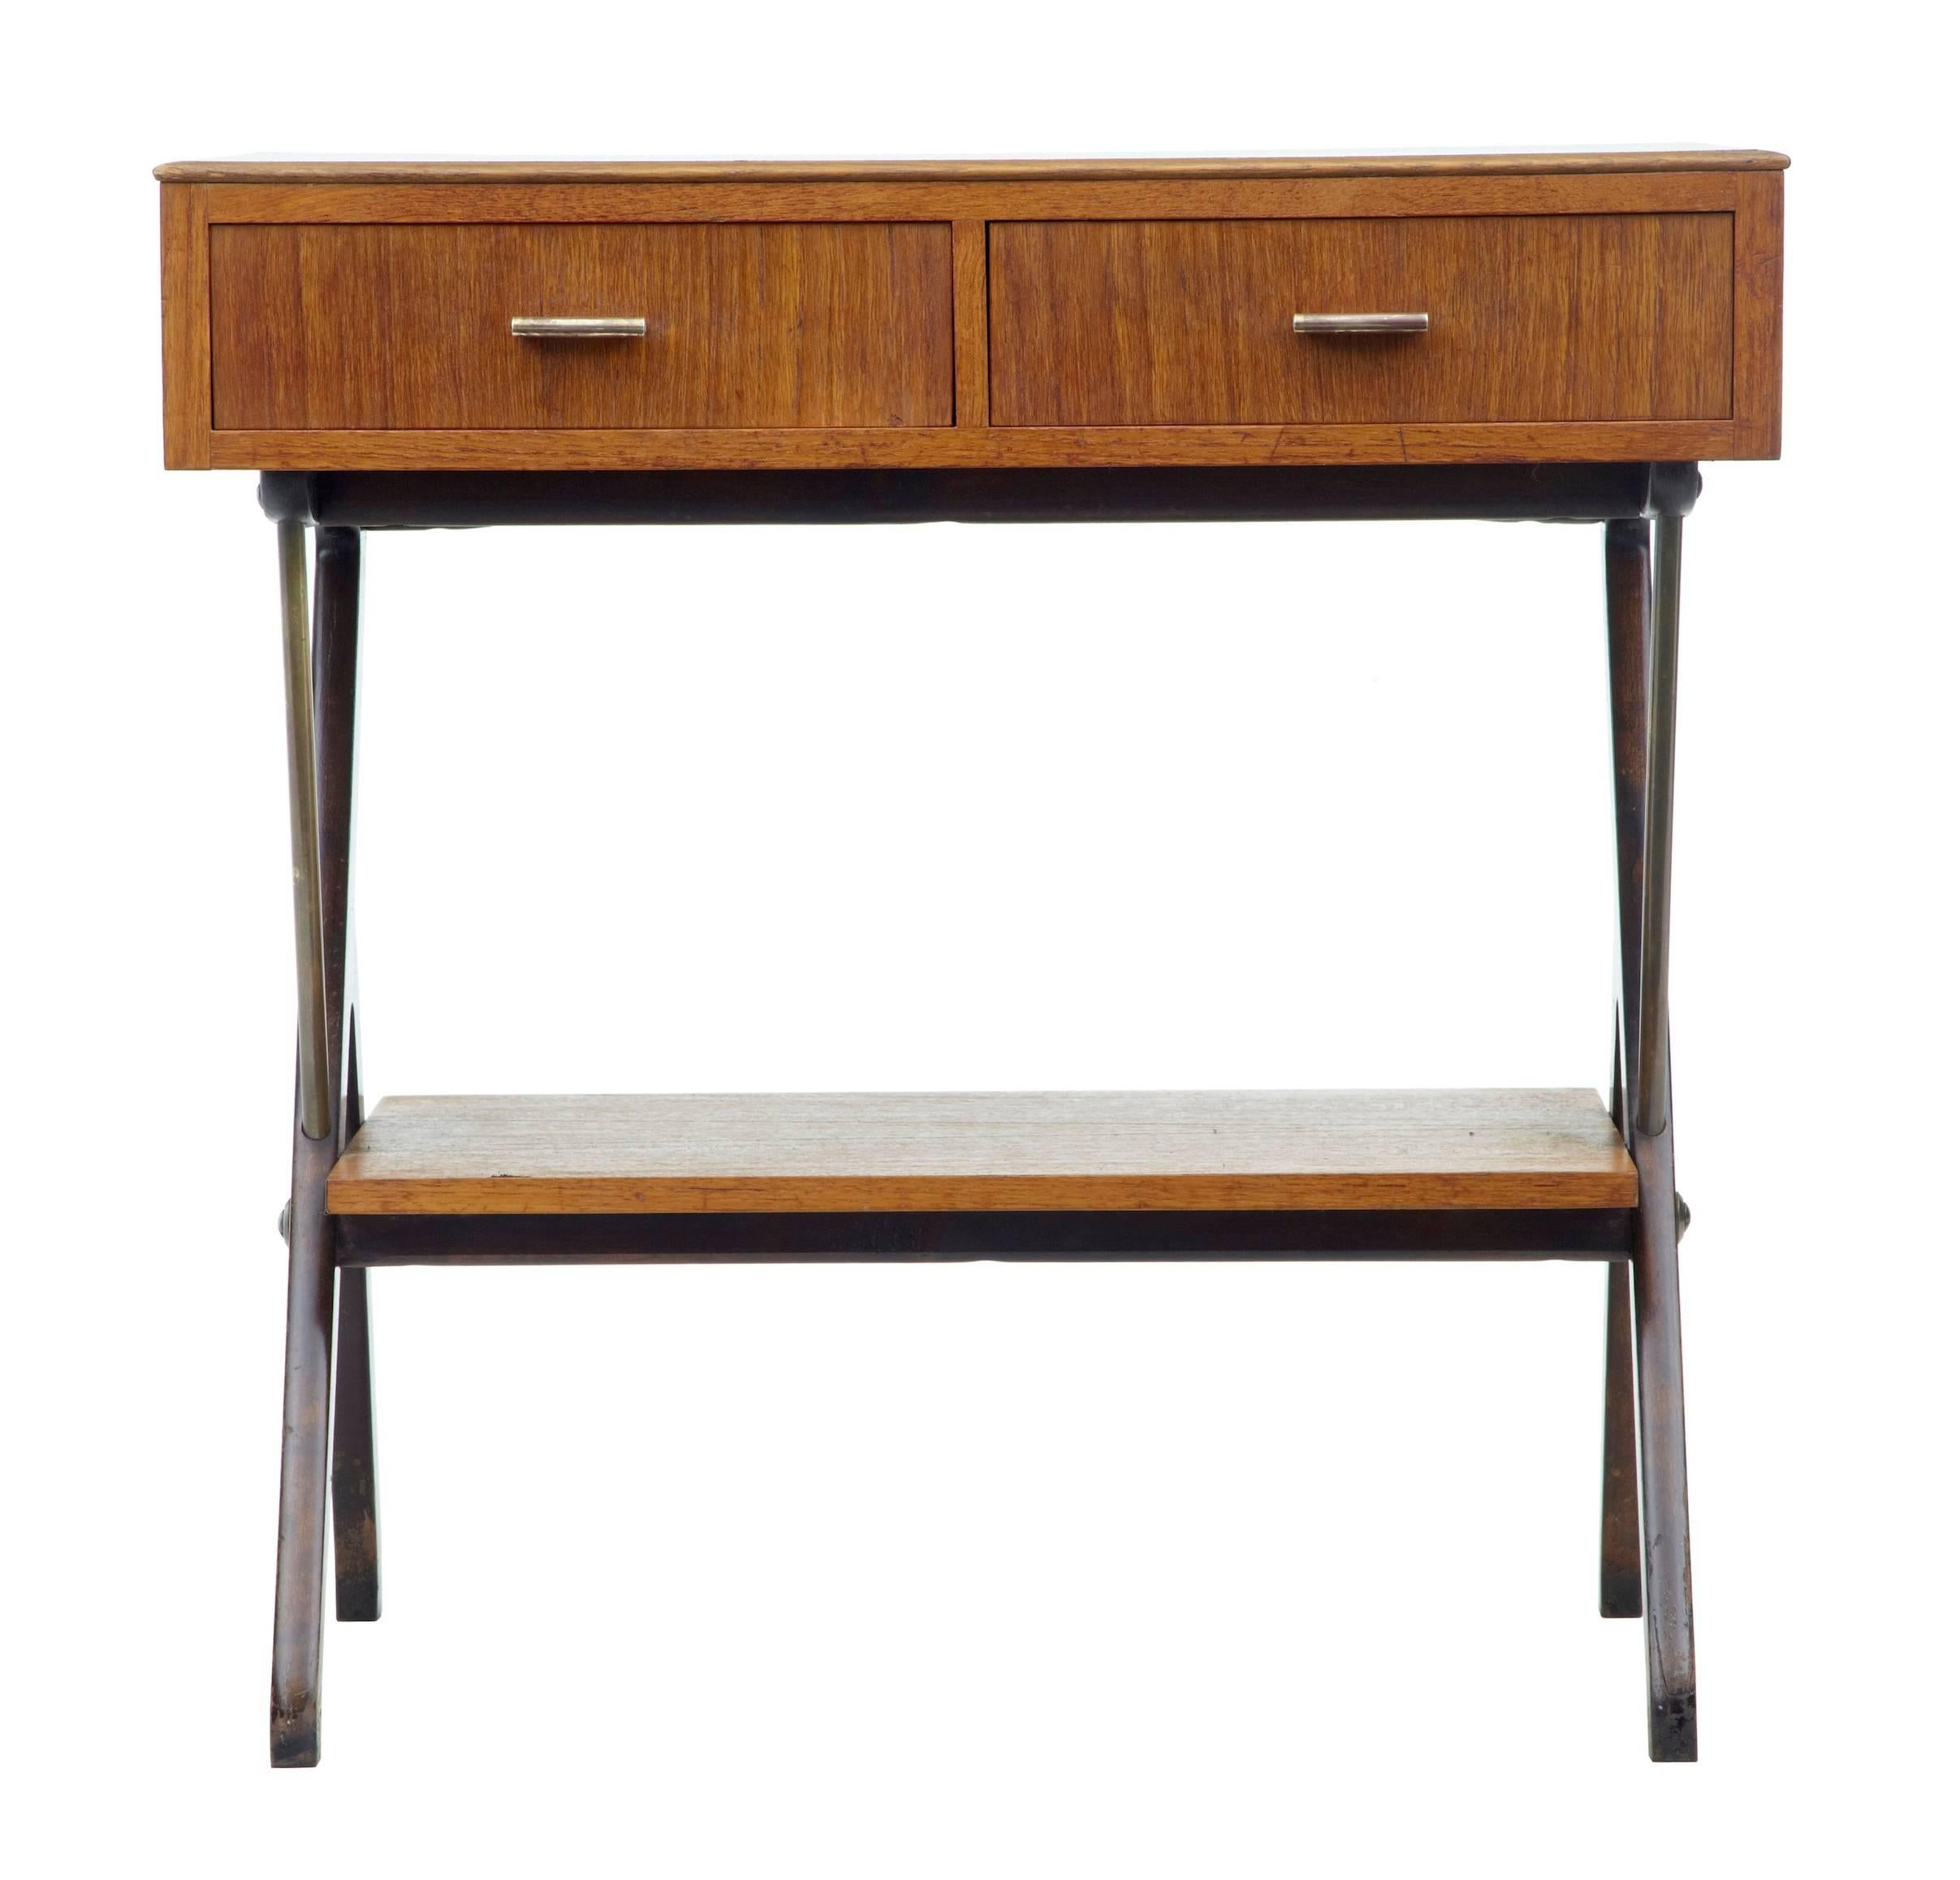 Teak side table with two front drawers.
Formica inlaid top.
Standing on Y frame legs, united by a storage shelf.

Measures: Height: 24